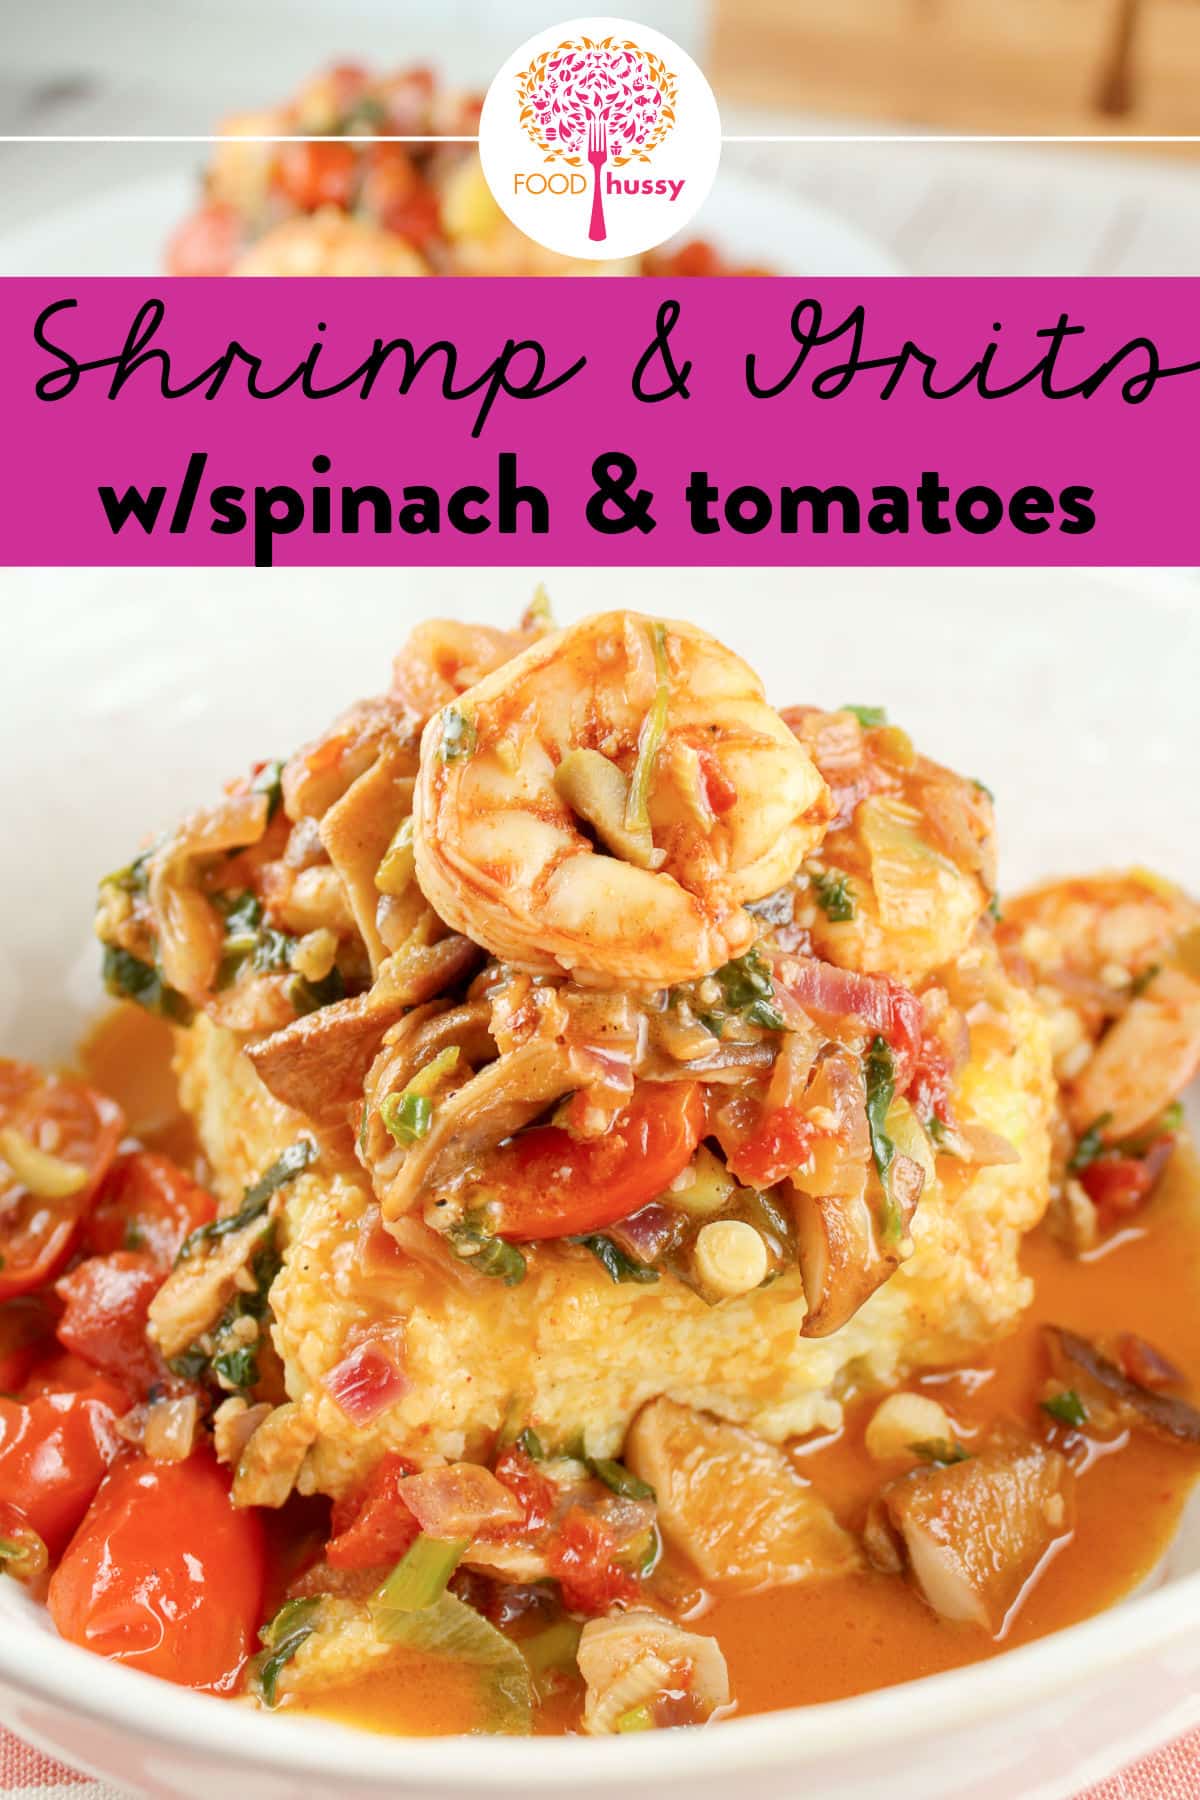 This Shrimp and Grits with Spinach & Tomatoes is a dish that will impress your friends and family! It is as delicious as it is beautiful! These cheesy grit cakes are smothered with jumbo shrimp, sauteed mushrooms, tomatoes and spinach.  via @foodhussy